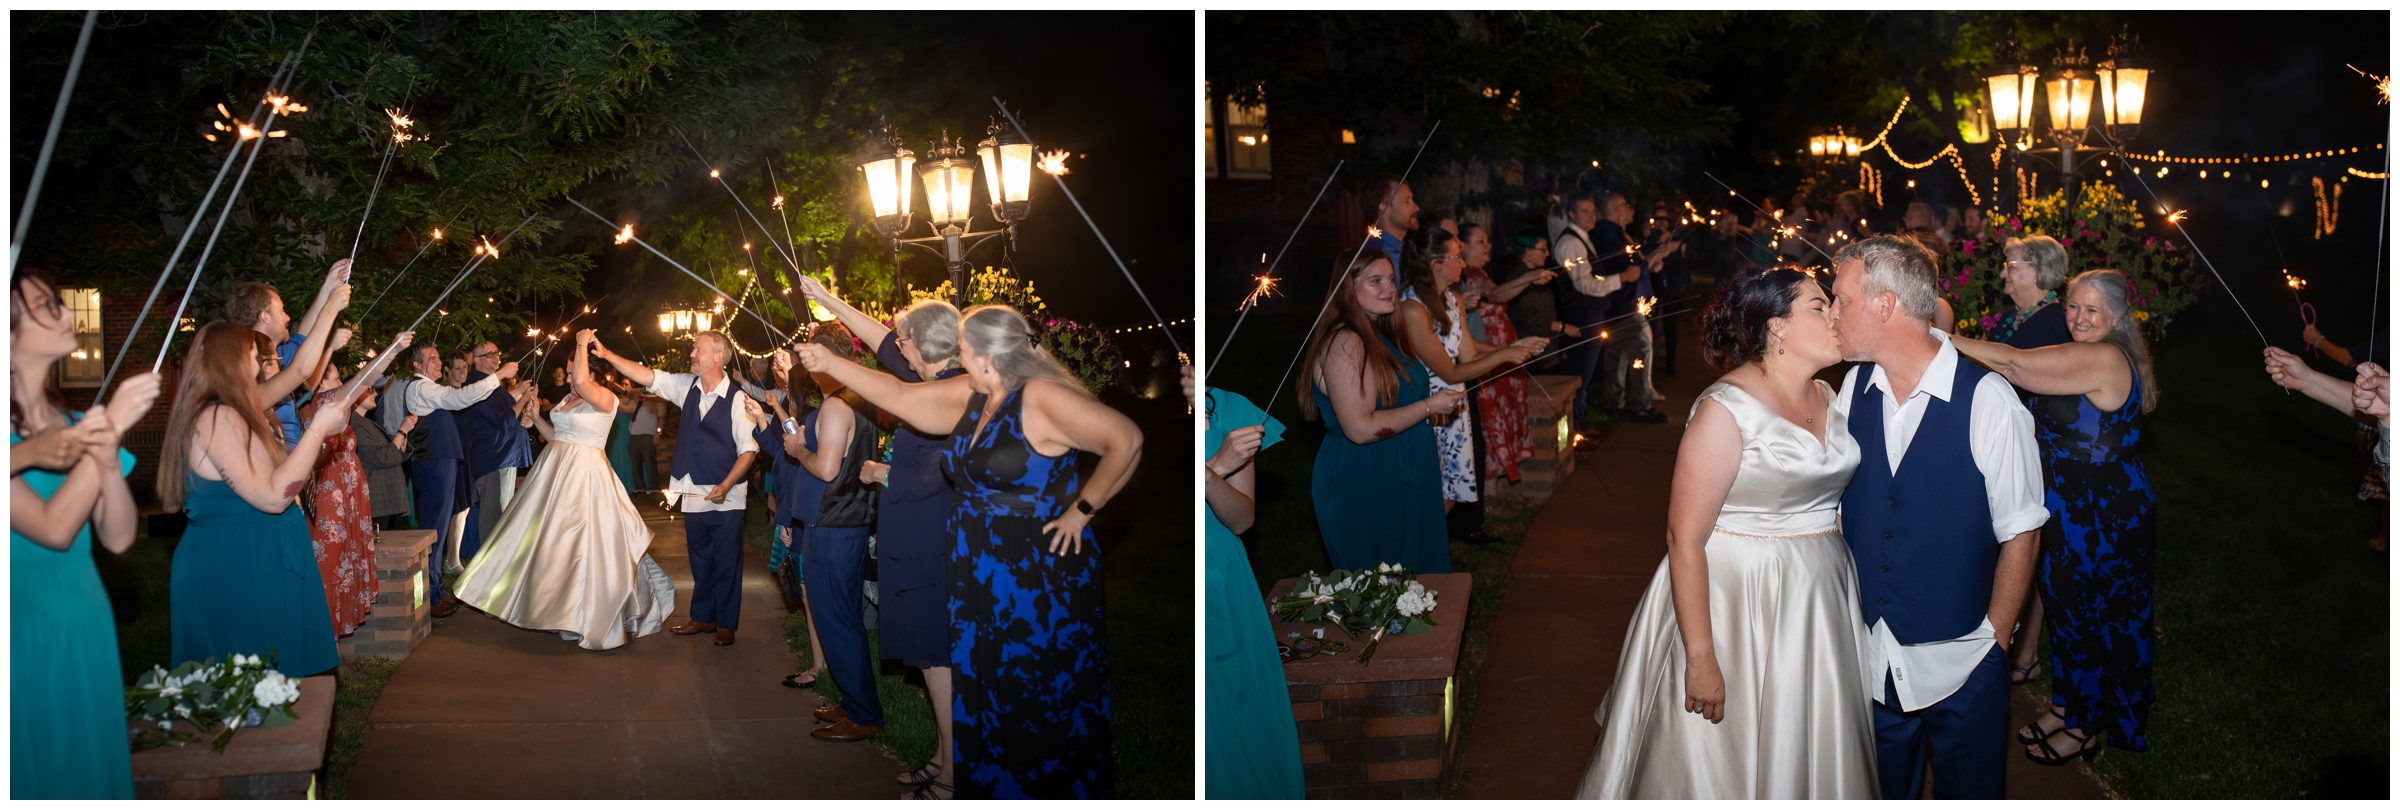 wedding sparkler exit after Dove House reception at Lionsgate by Plum Pretty Photography 